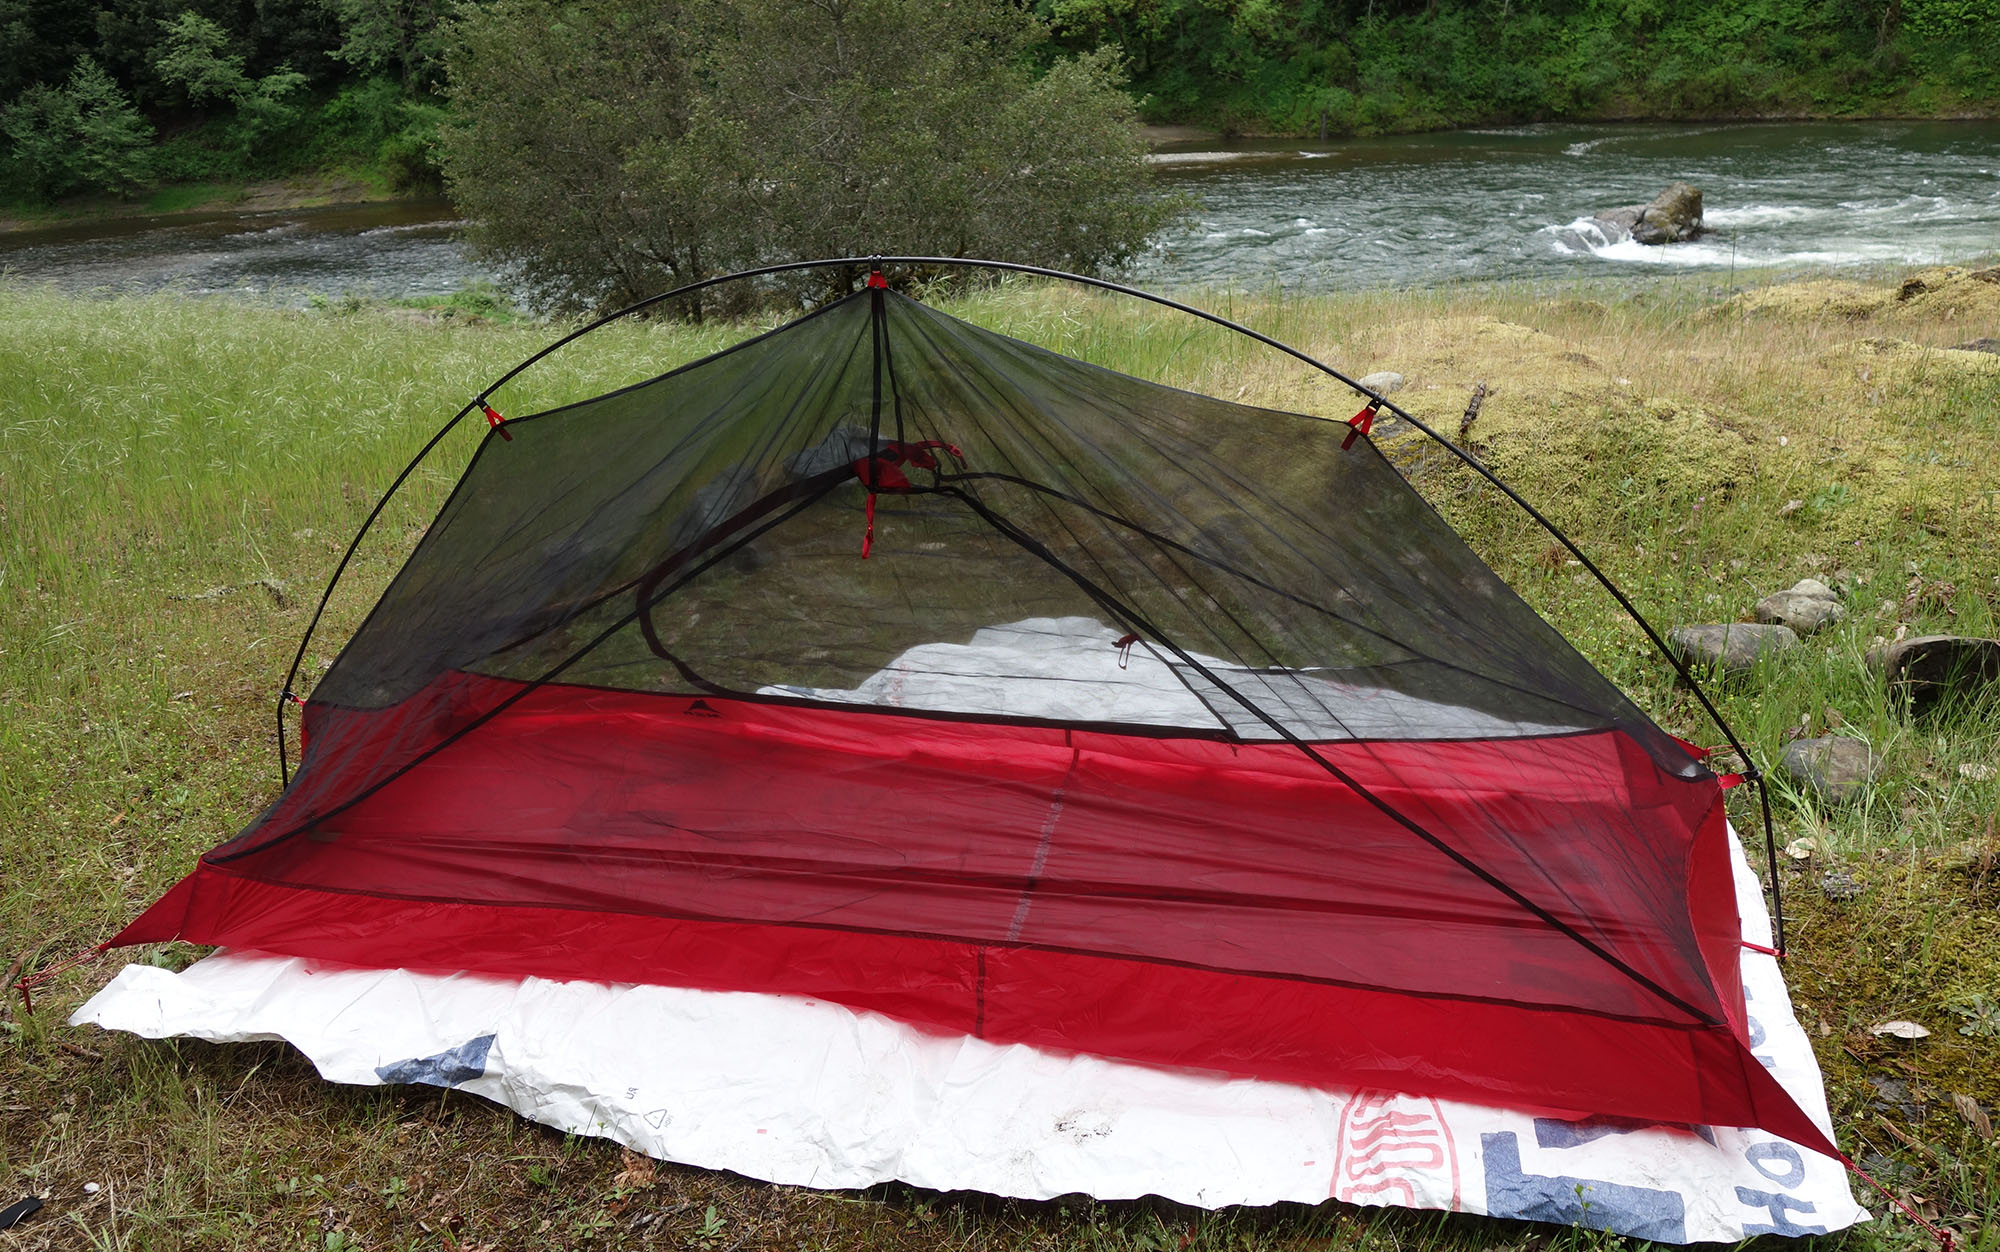 A tent is set up on a footprint.